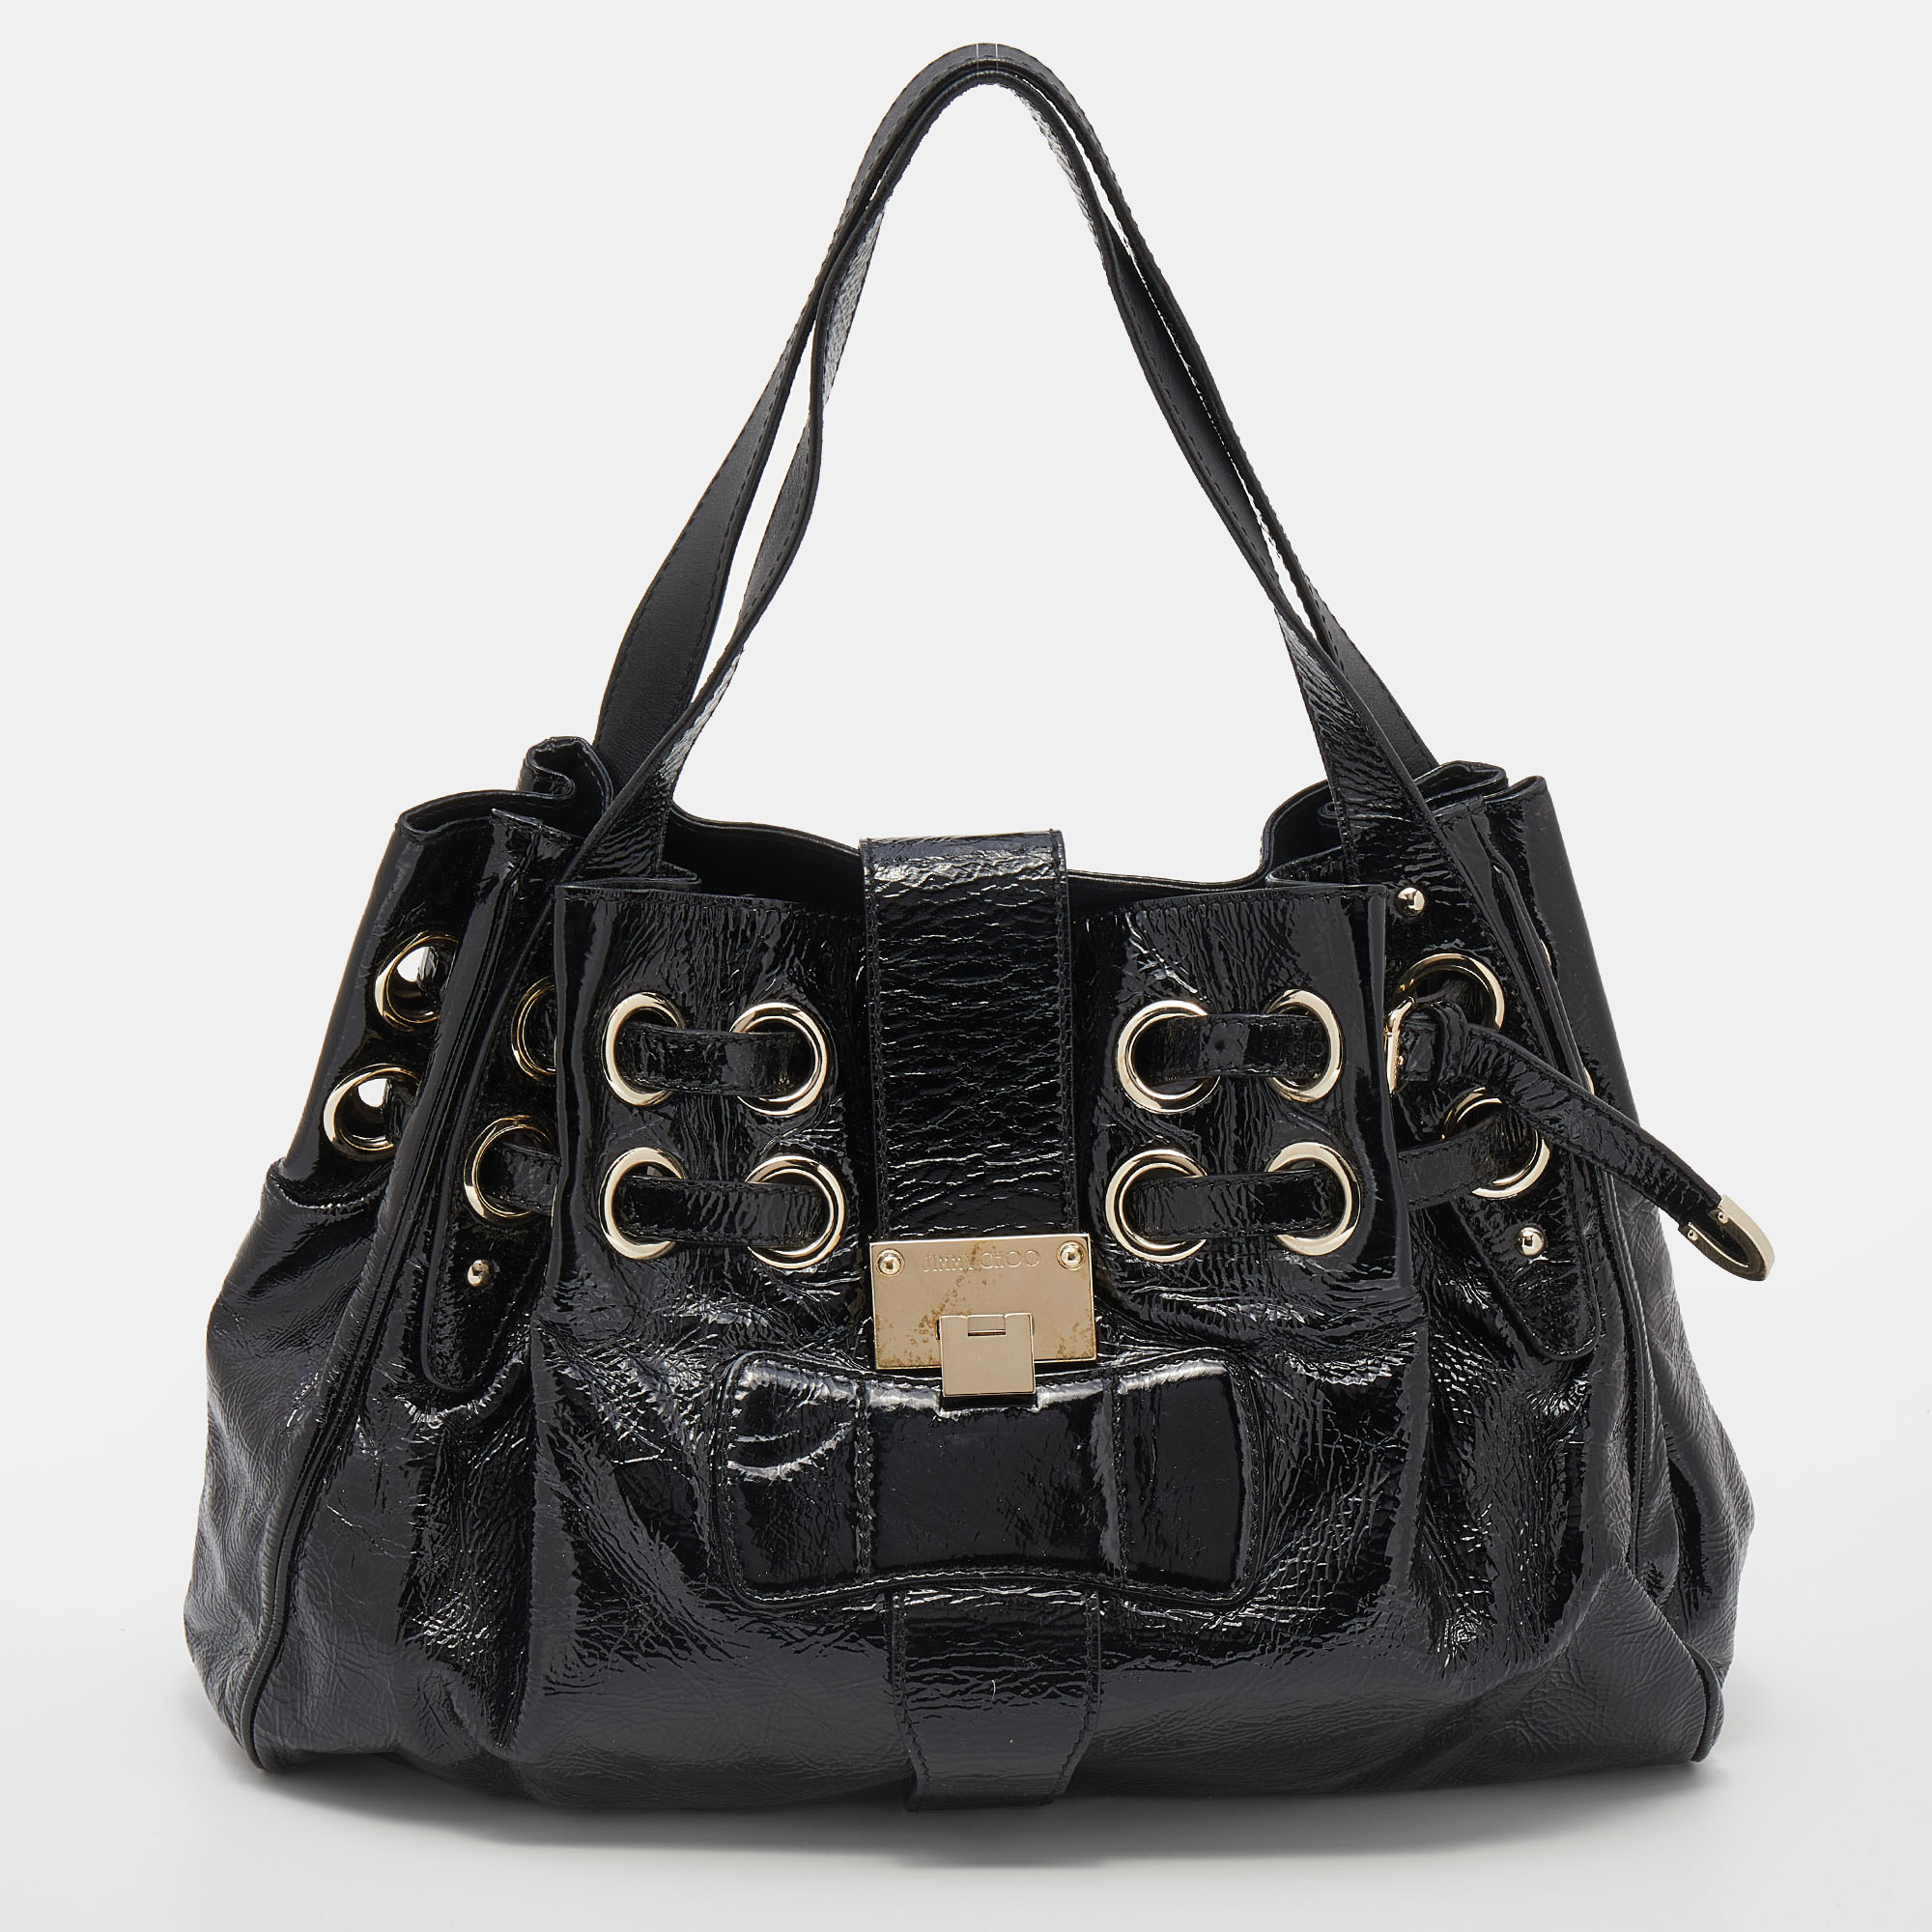 One of the most stunning creations from the House of Jimmy Choo is this Riki tote bag. It is made from black crinkled patent leather on the exterior. It features an Alcantara lined interior and gold tone hardware. The slightly slouched silhouette of the tote is supported by dual handles.